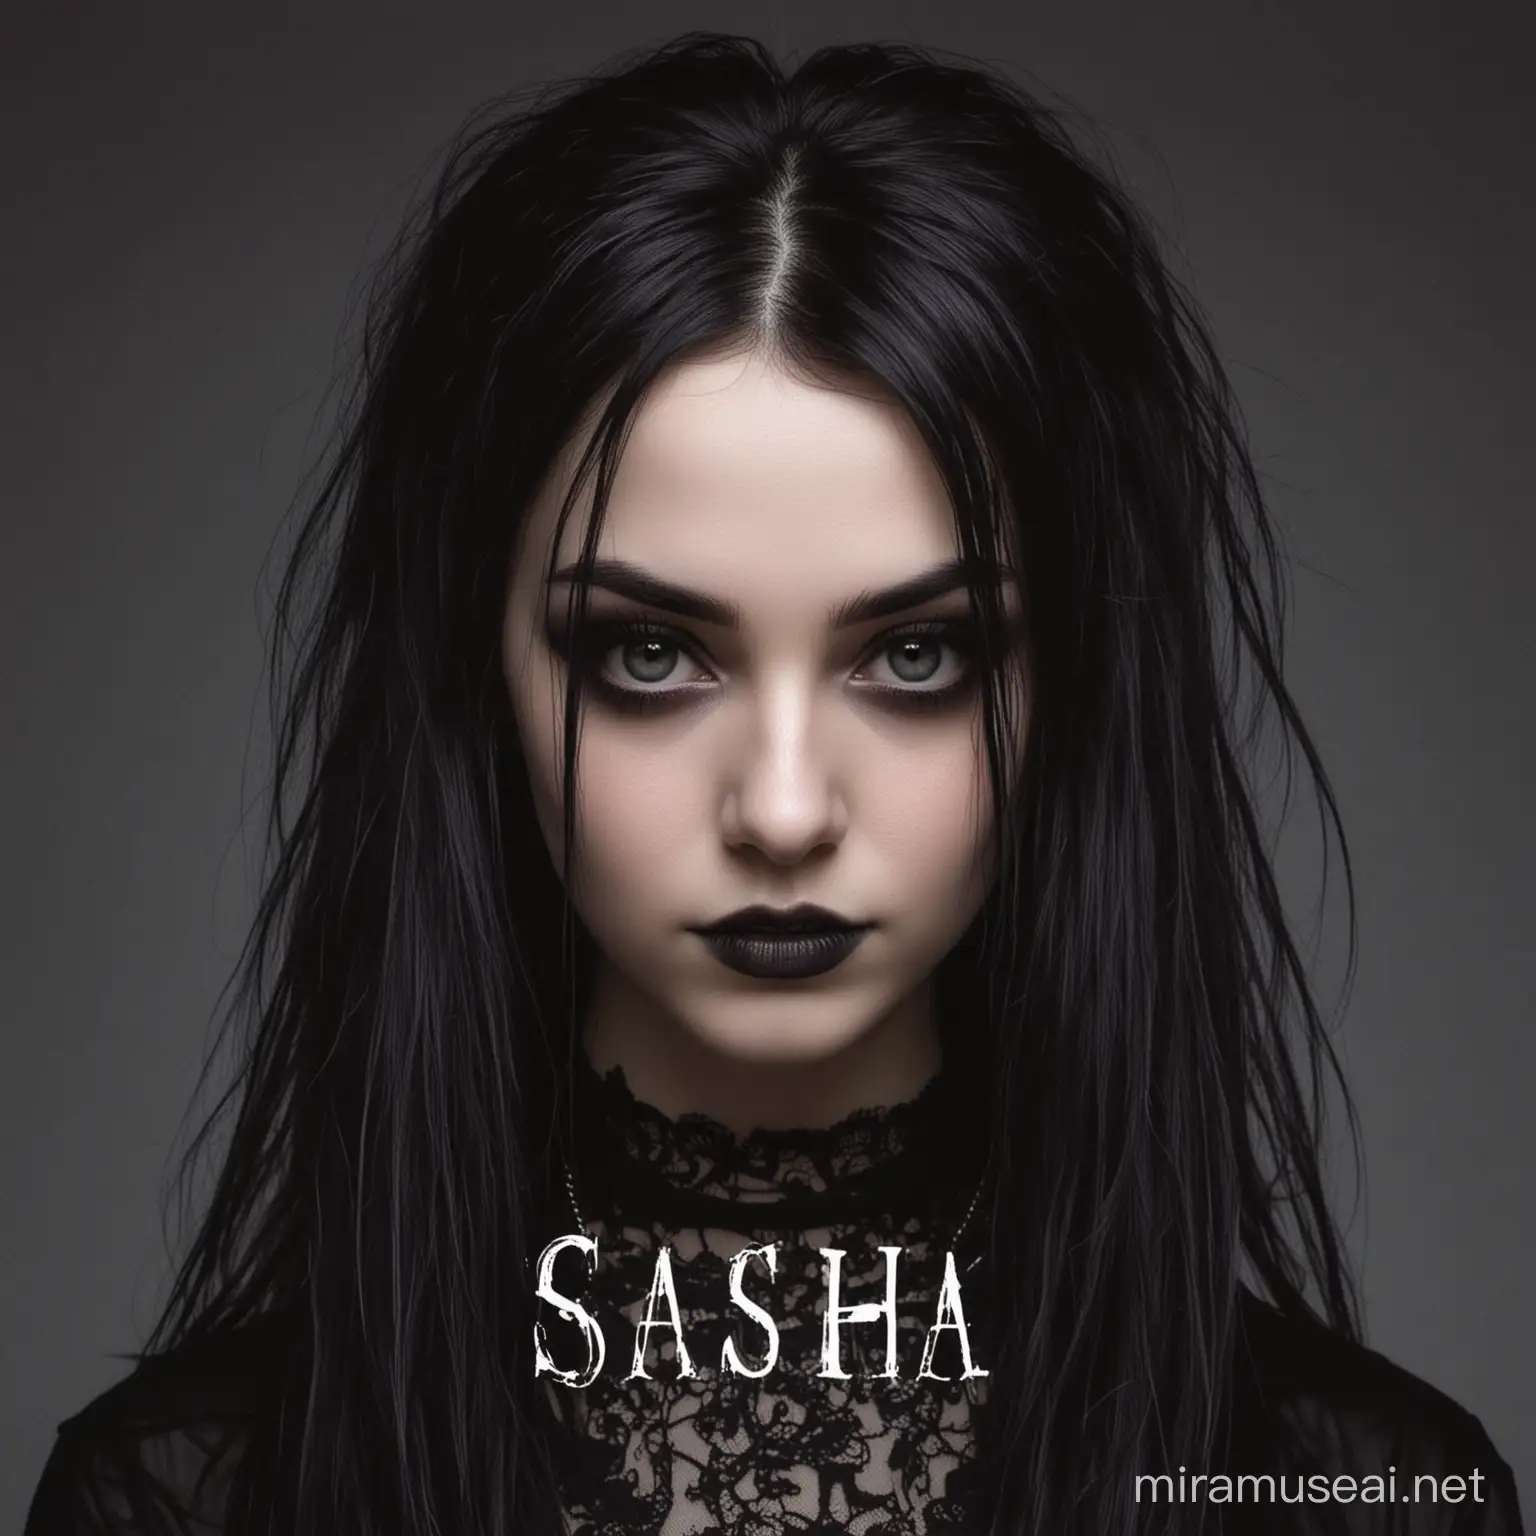 goth girl with the text "Sasha" at the bottom